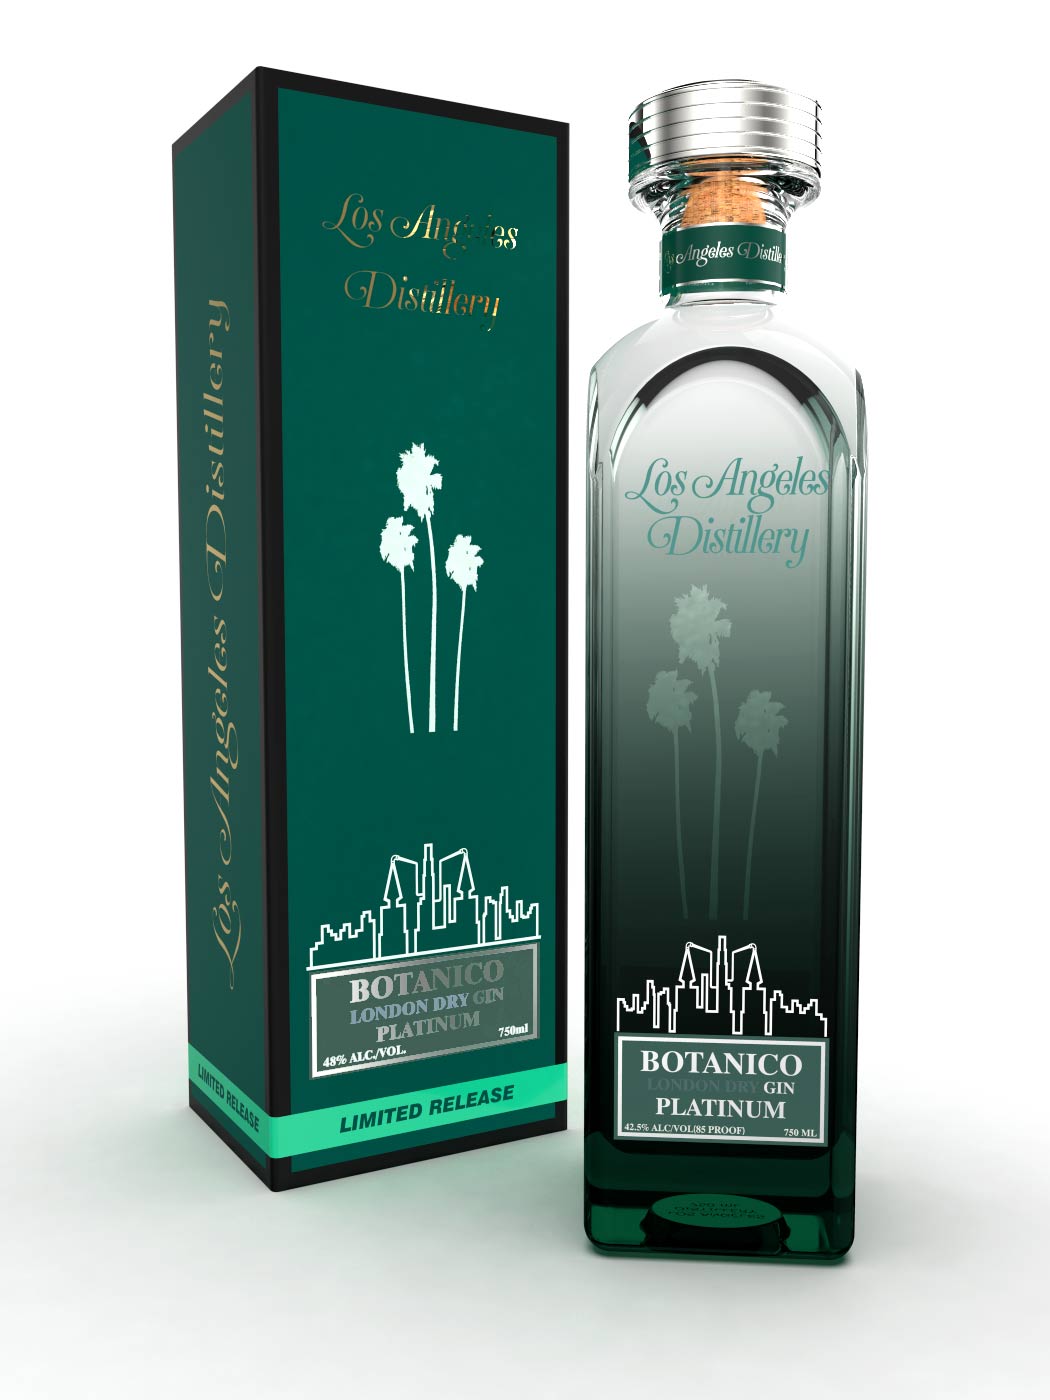 Botanico London Dry Gin Platinum in a Gift Box from LA Distillery